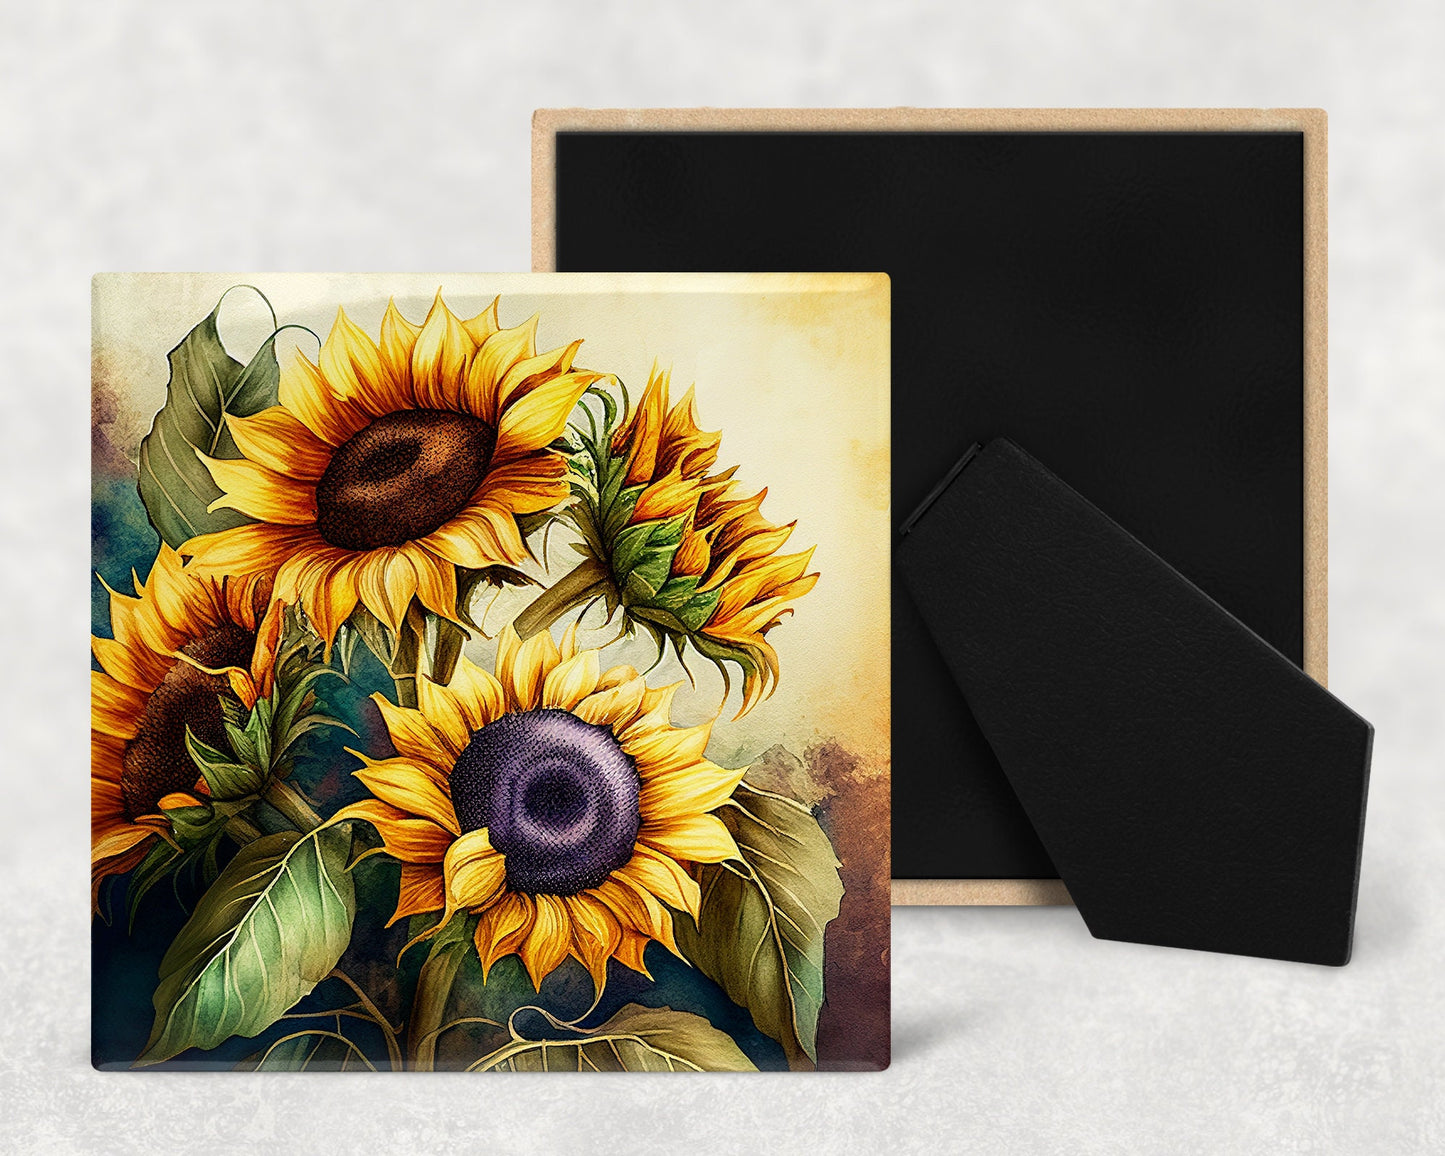 Sunflowers Art Decorative Ceramic Tile Set with Optional Easel Back - Available in 4 sizes - Set of 4